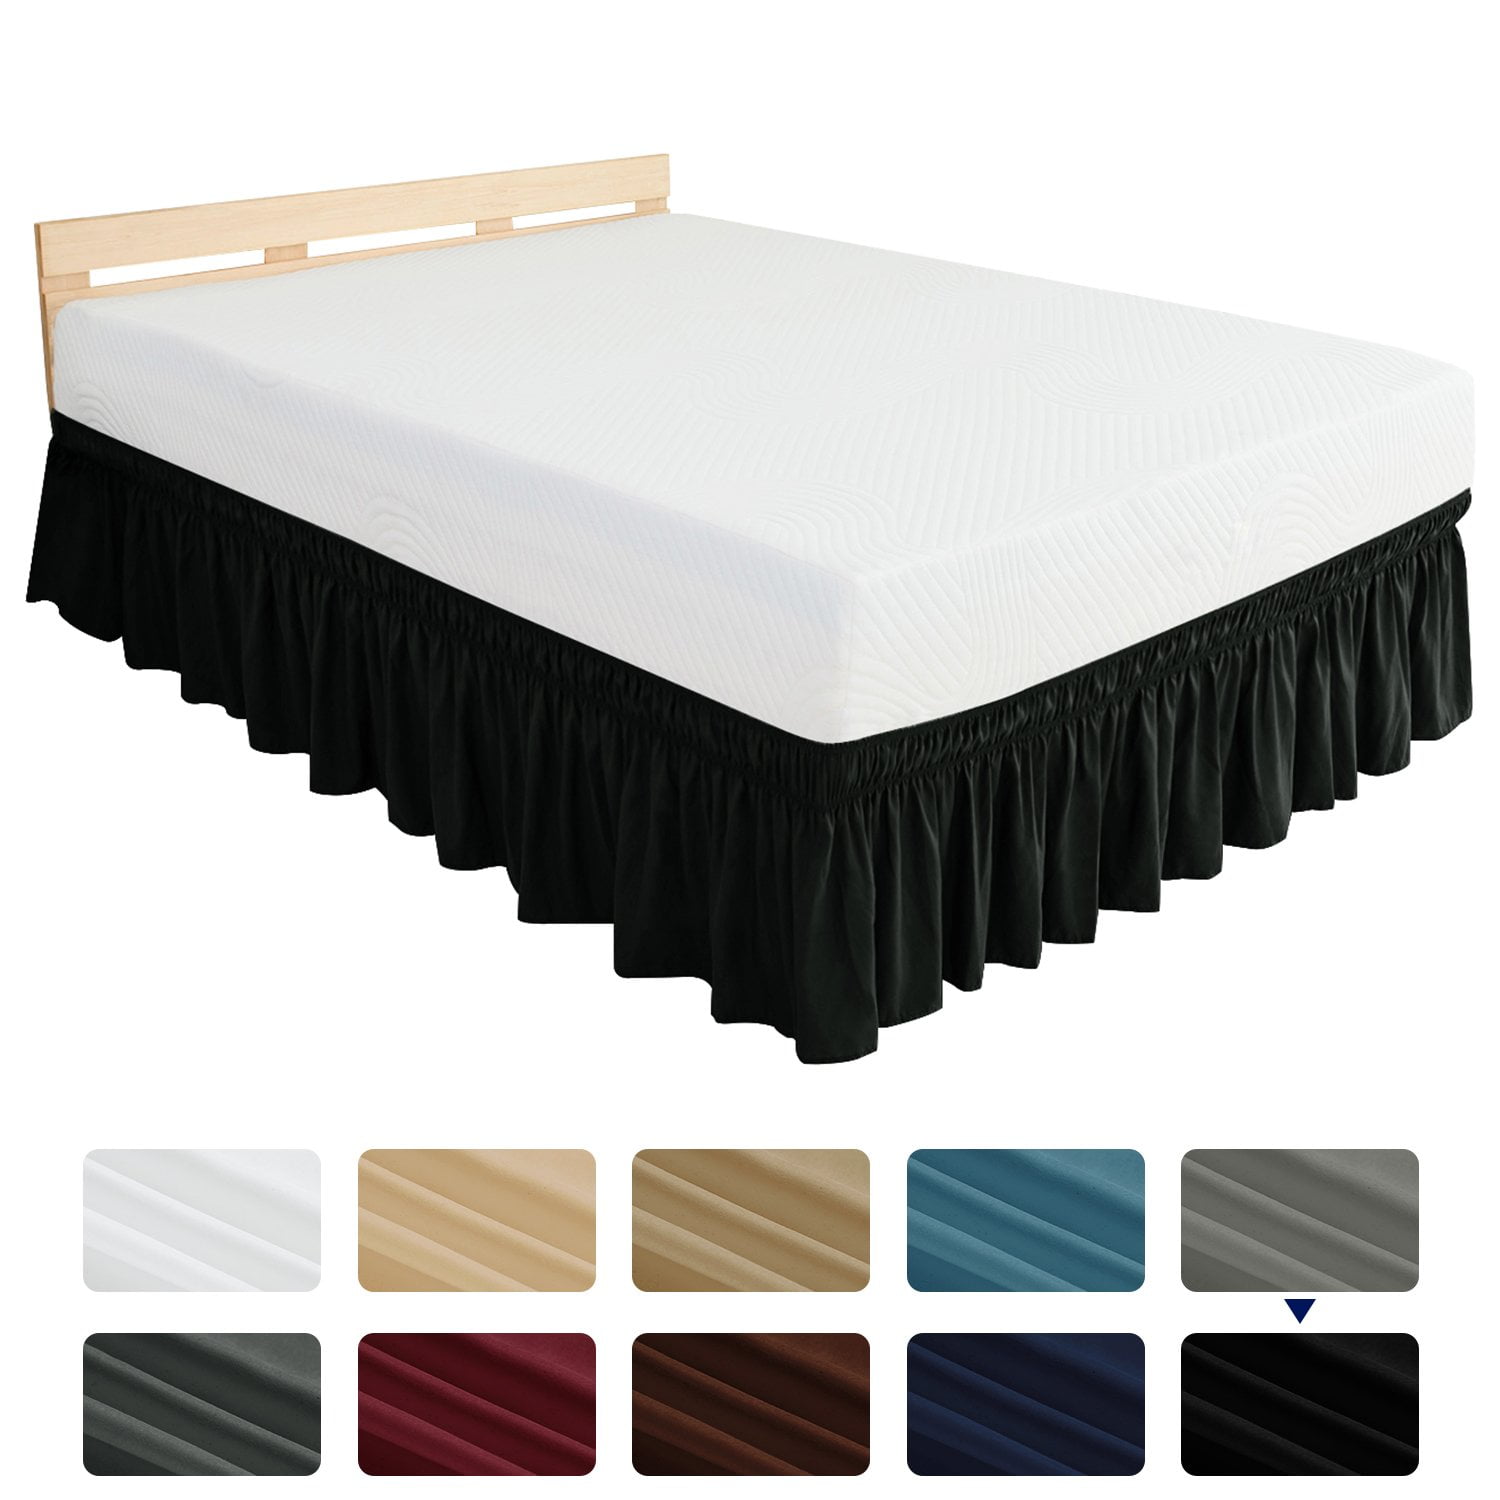 Bed Skirt Stretchy Fitted Cover Solid Color Bed Base Wrap Bedspread Dust Ruffle 